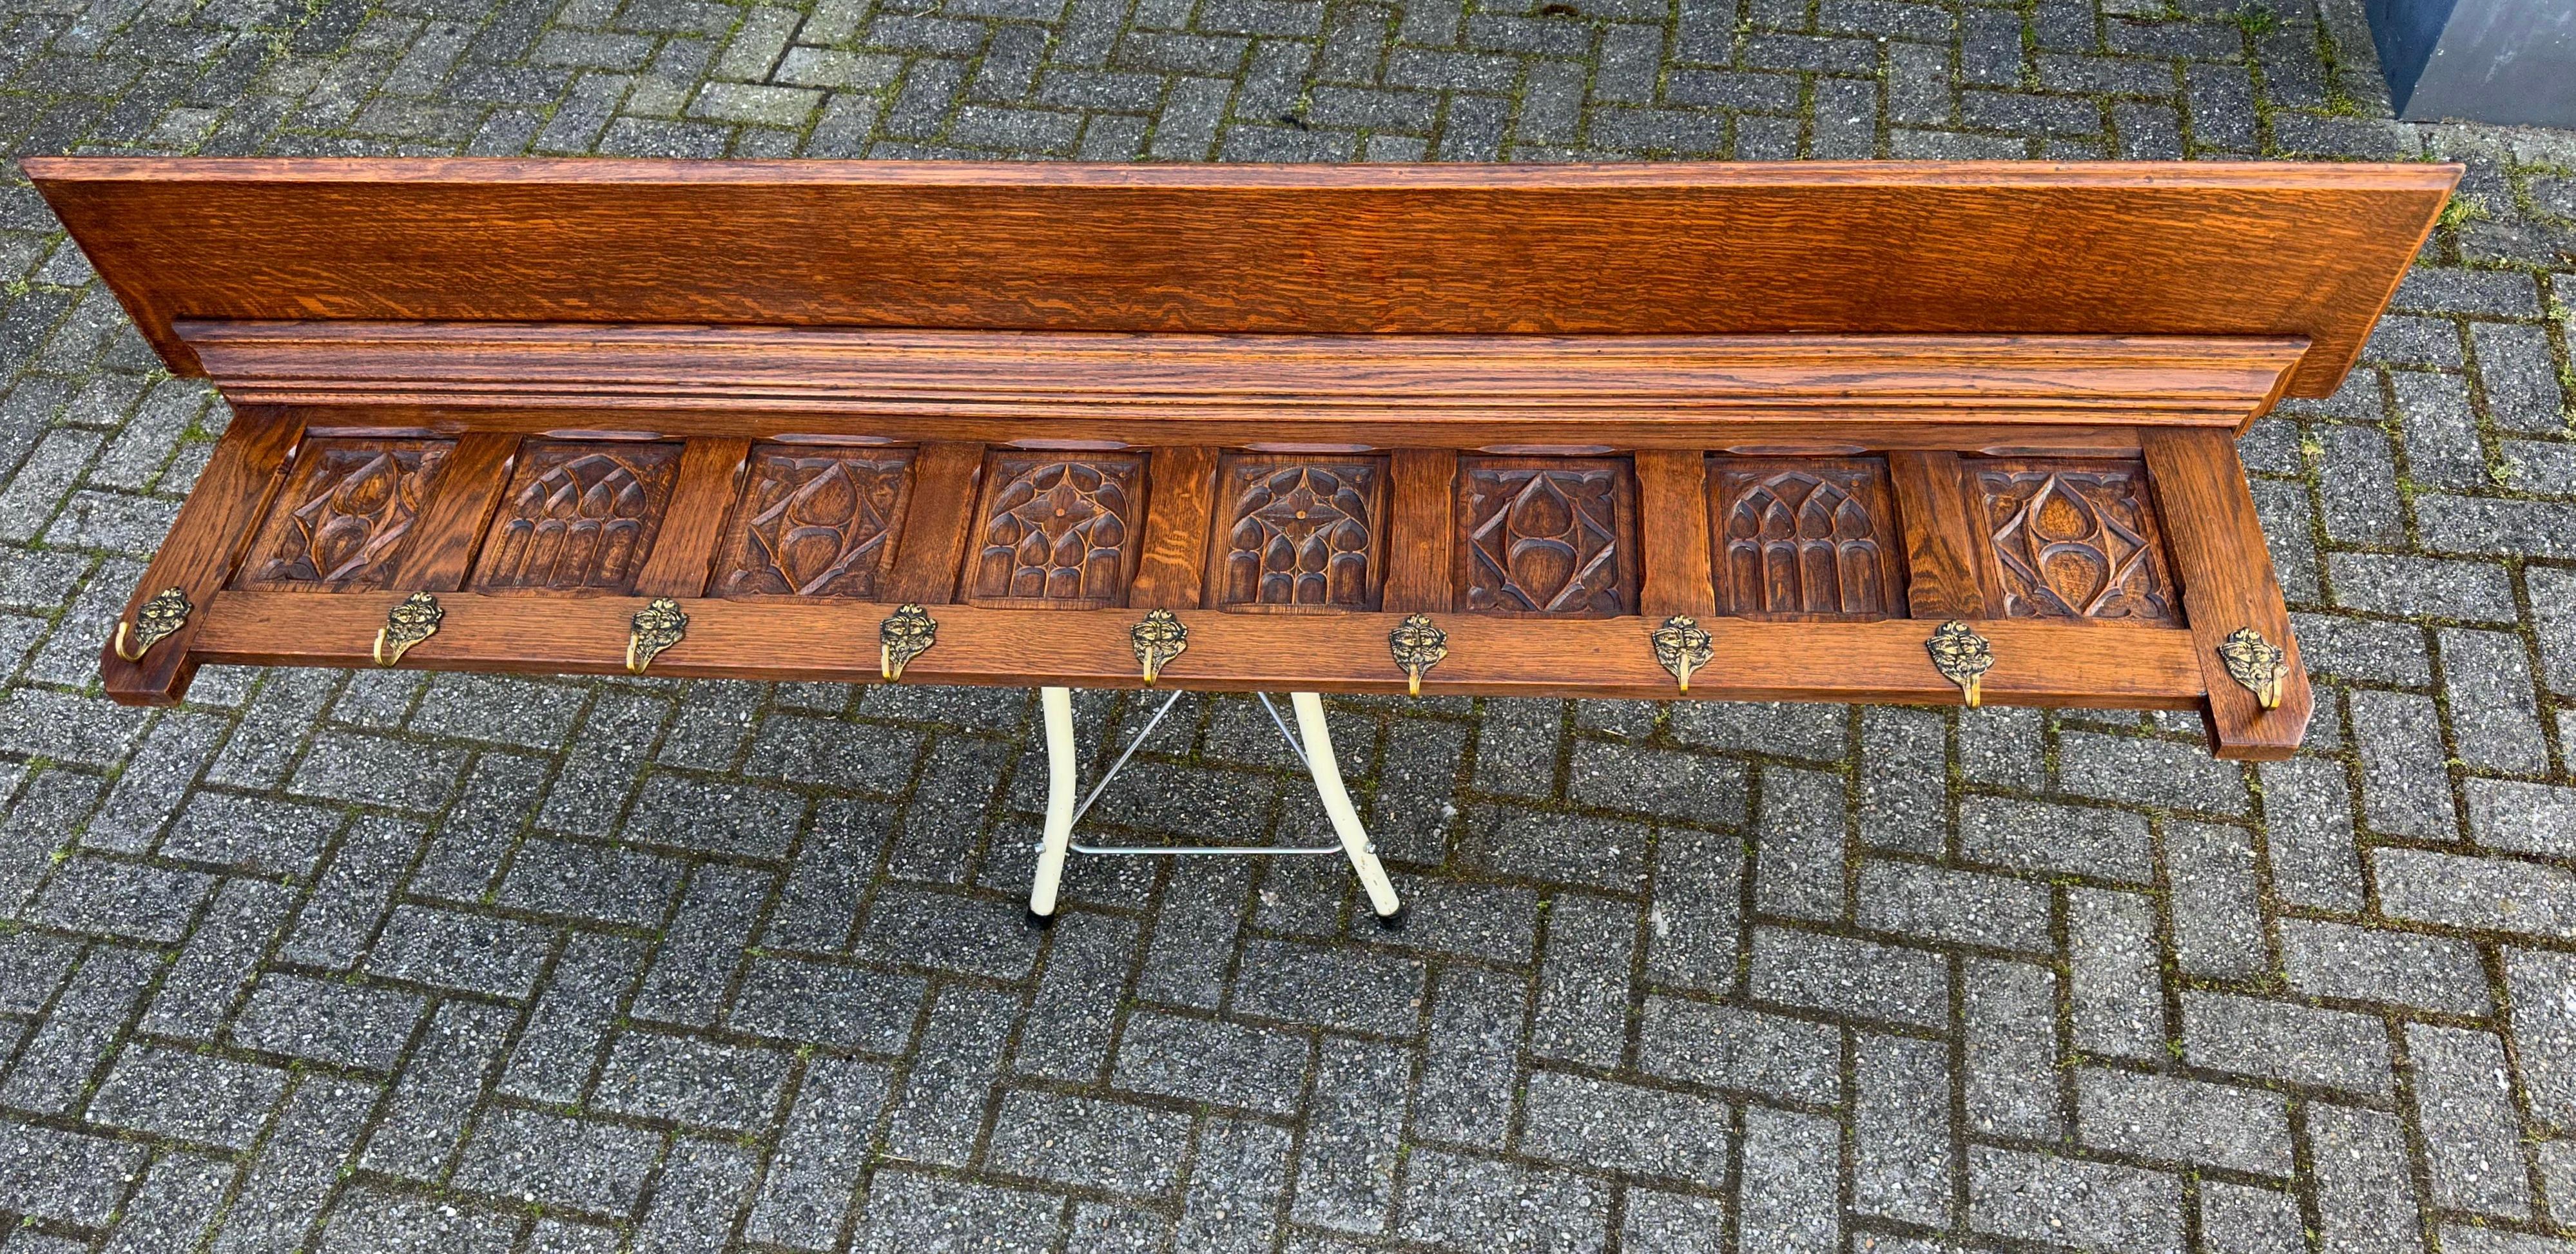 Wonderful craftsmanship, large and solid oak Gothic Revival coat-rack.

Anyone who has ever visited a Gothic (Revival) church or other Gothic style building will immediately recognize the same elements in this hand carved coat rack. The symmetry